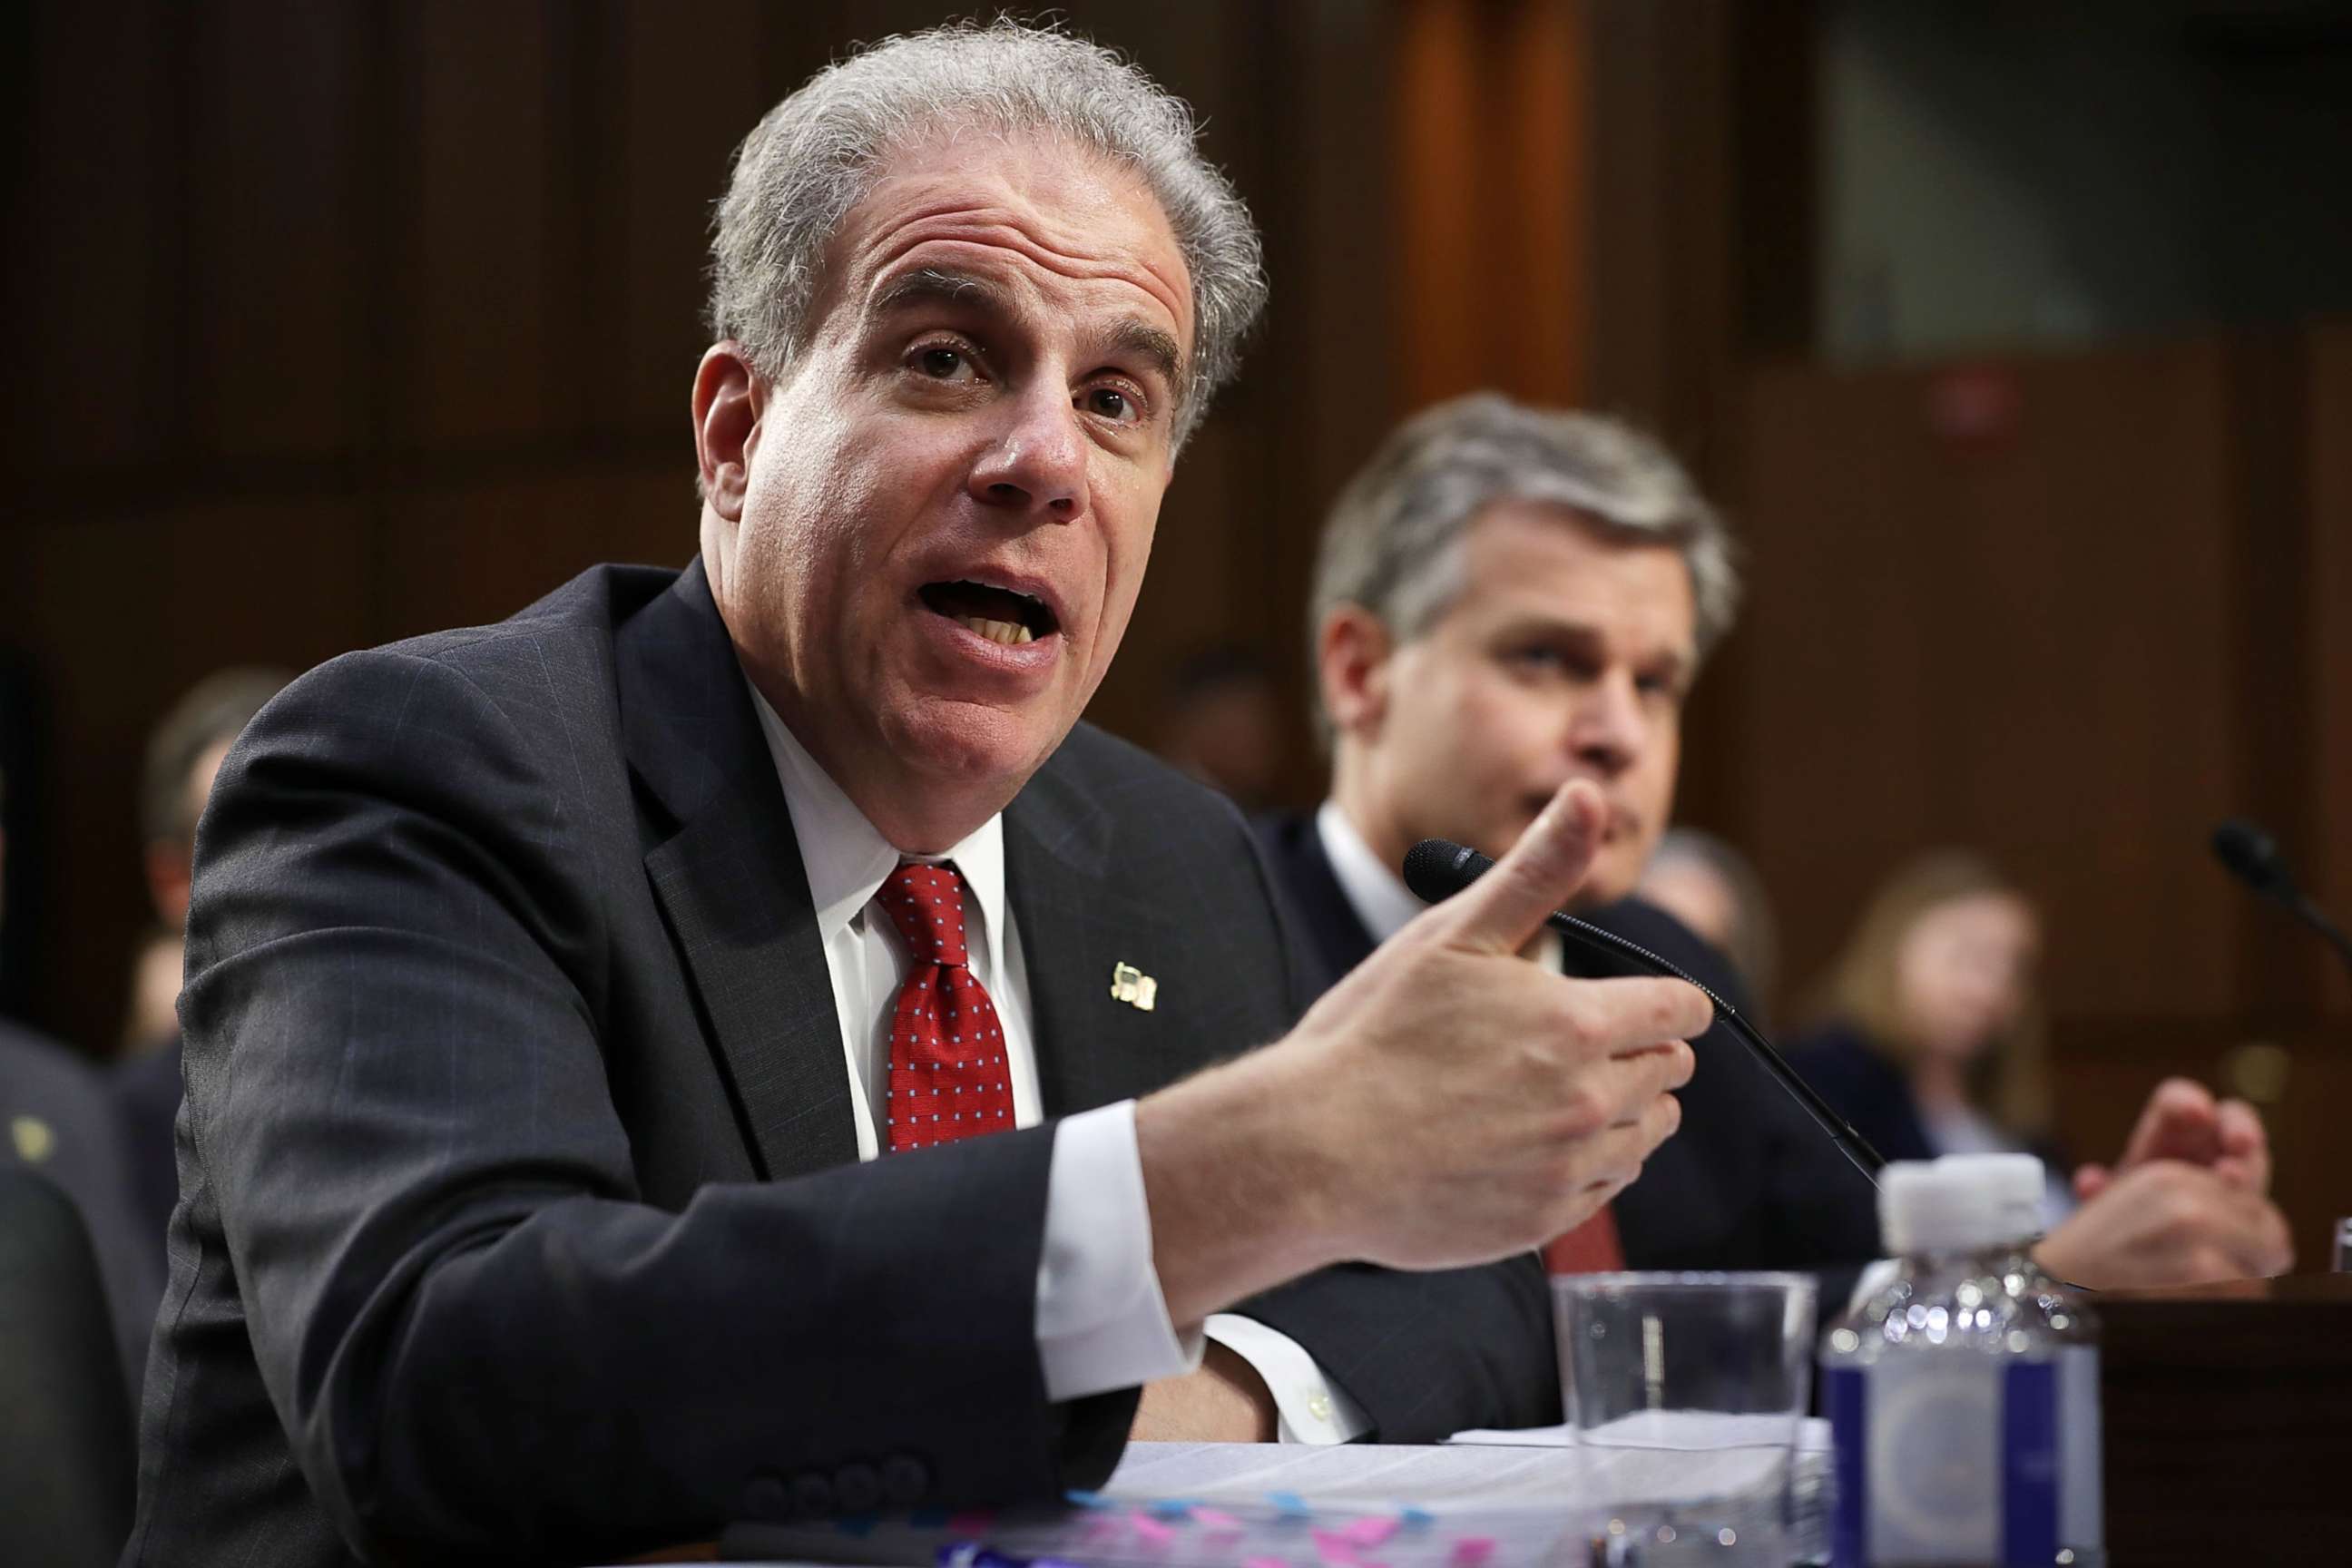 PHOTO: Justice Department Inspector General Michael Horowitz testifies before the Senate Judiciary Committee in the Hart Senate Office Building on Capitol Hill in Washington, June 18, 2018.